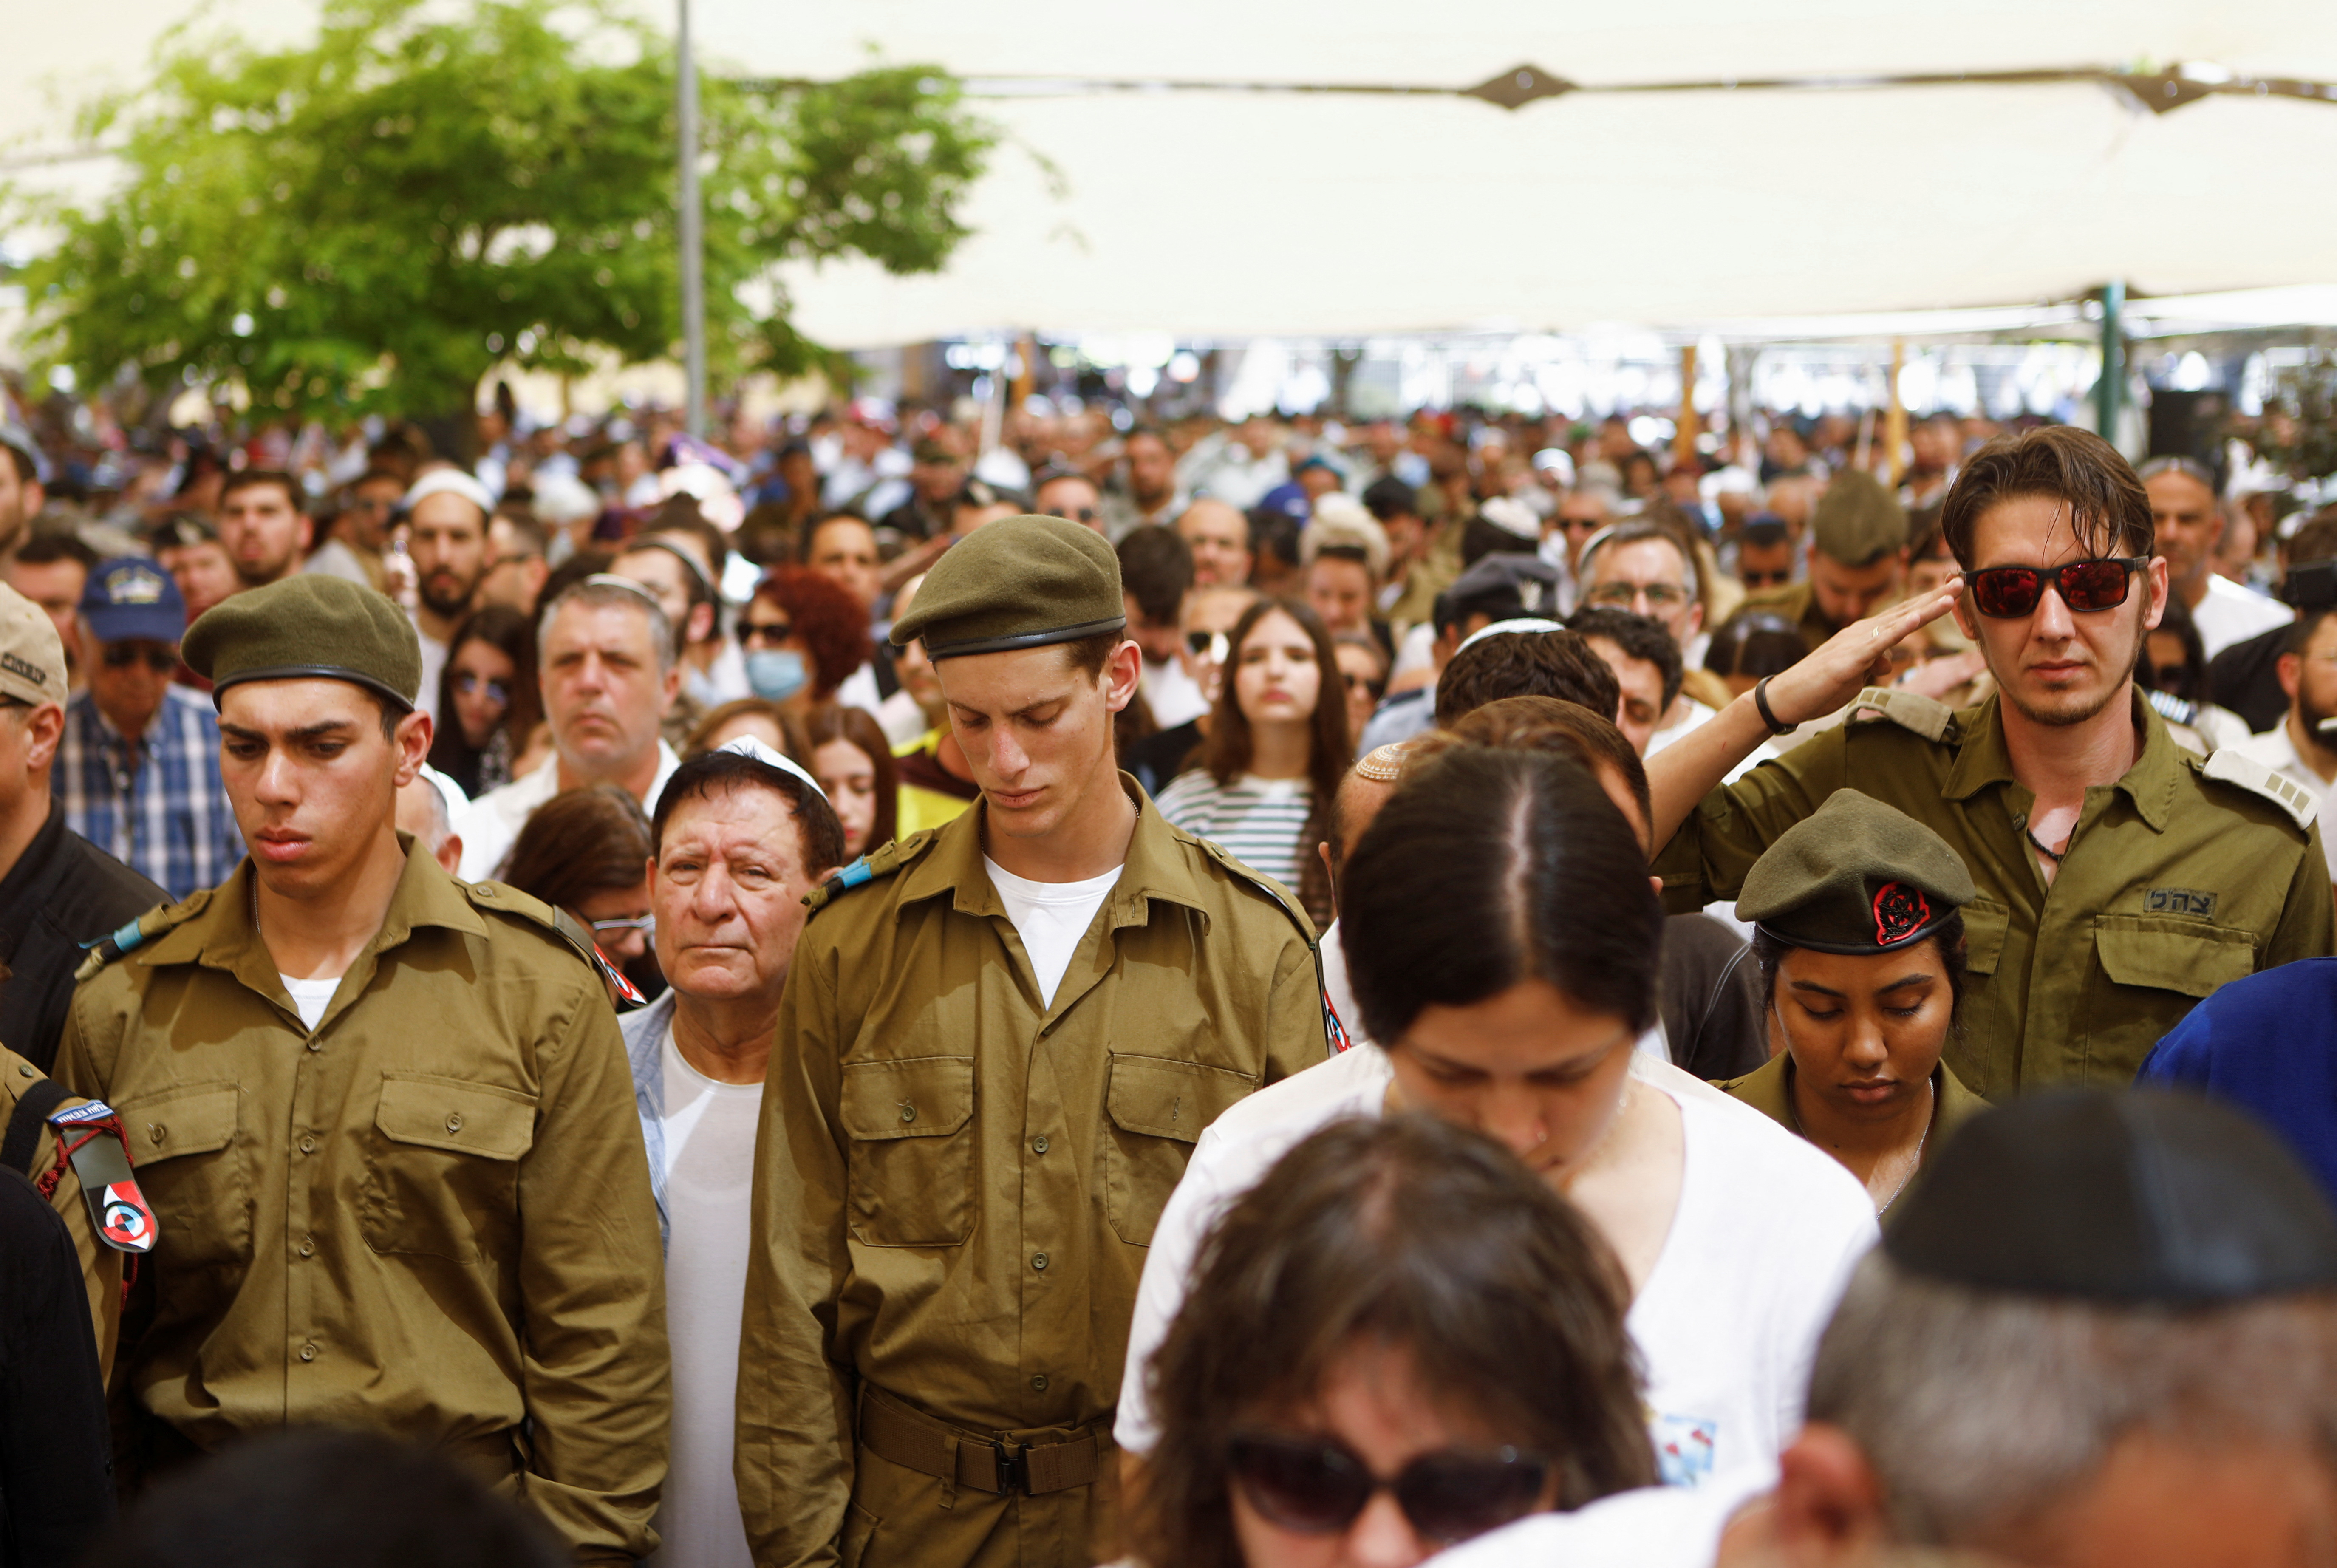 Israel's Memorial Day commemorating fallen soldiers around the country